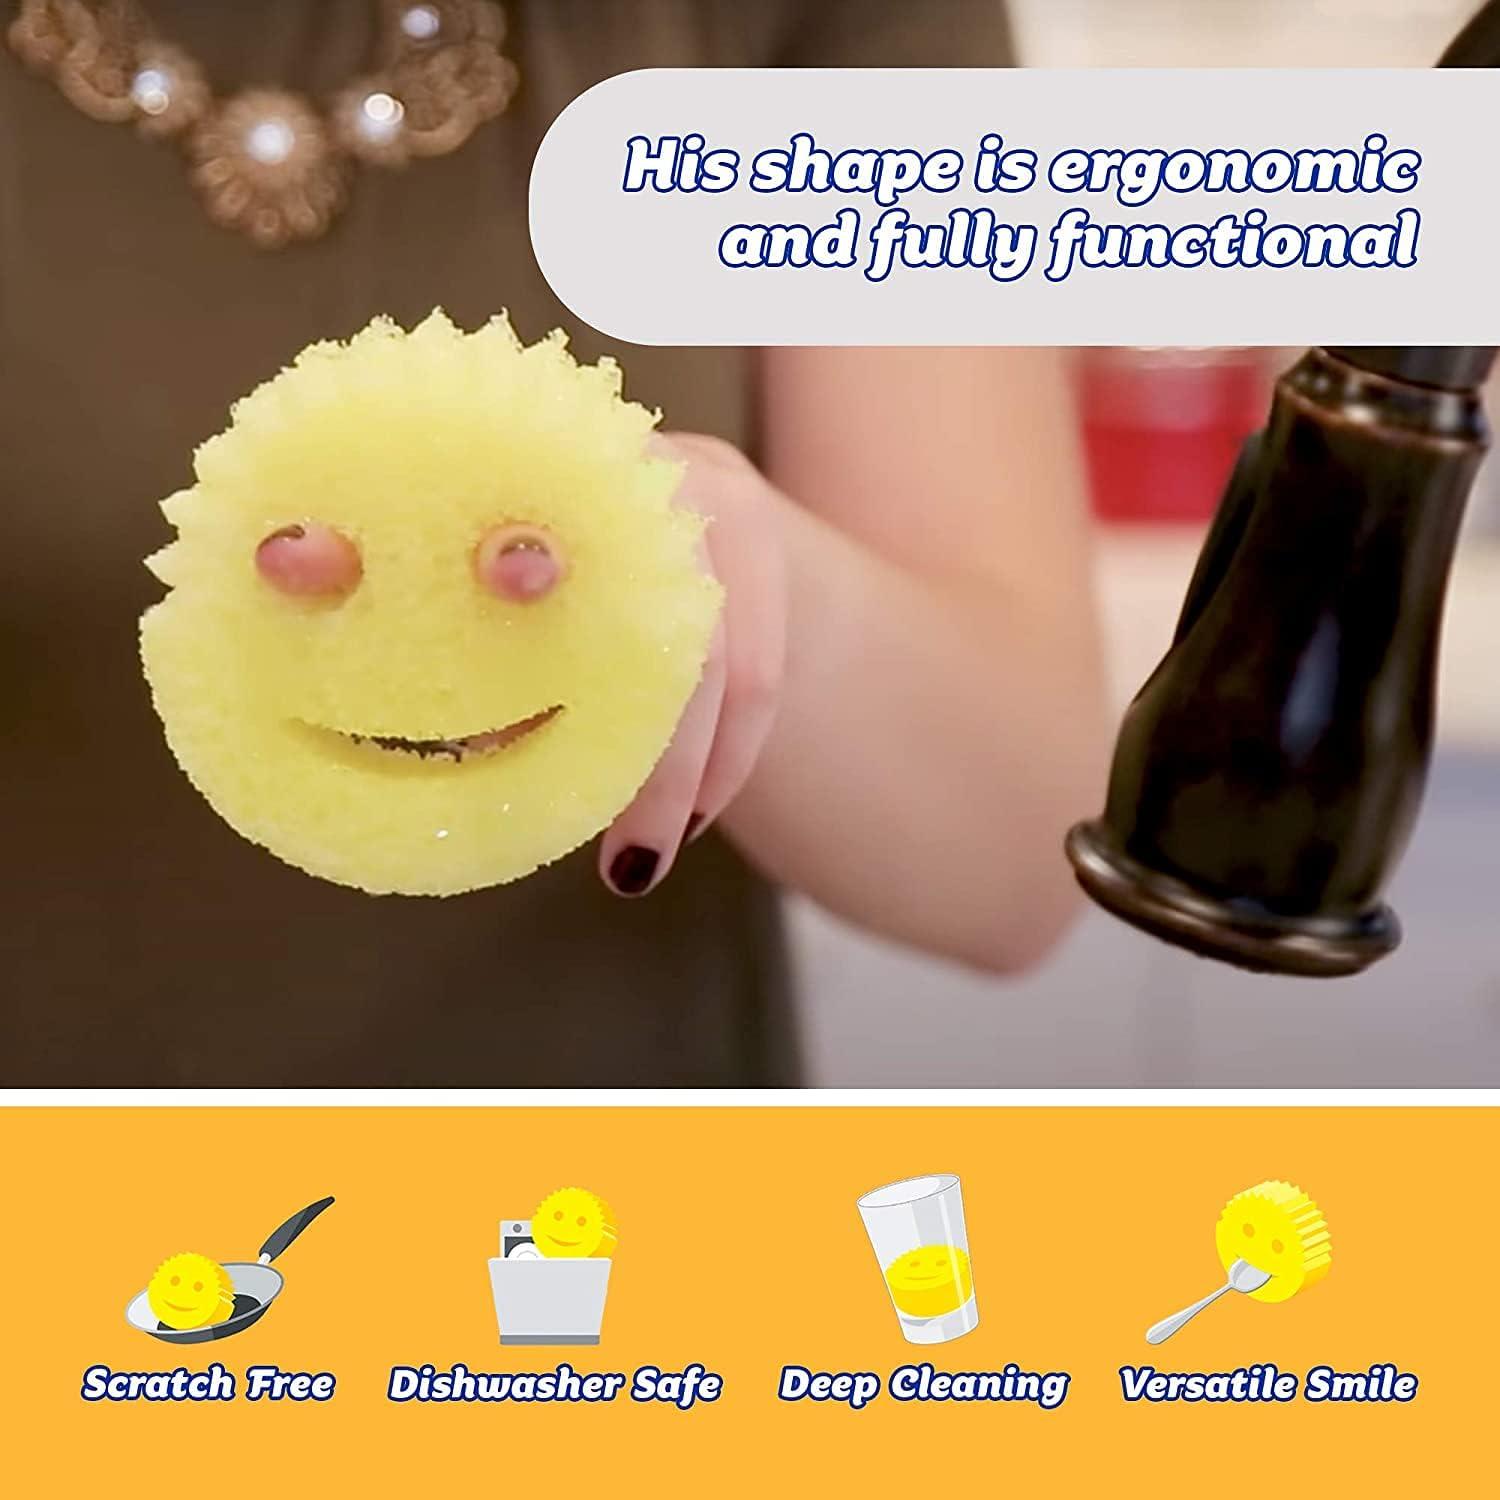 Get America's Best Smiling Scrubber from Scrub Daddy today!